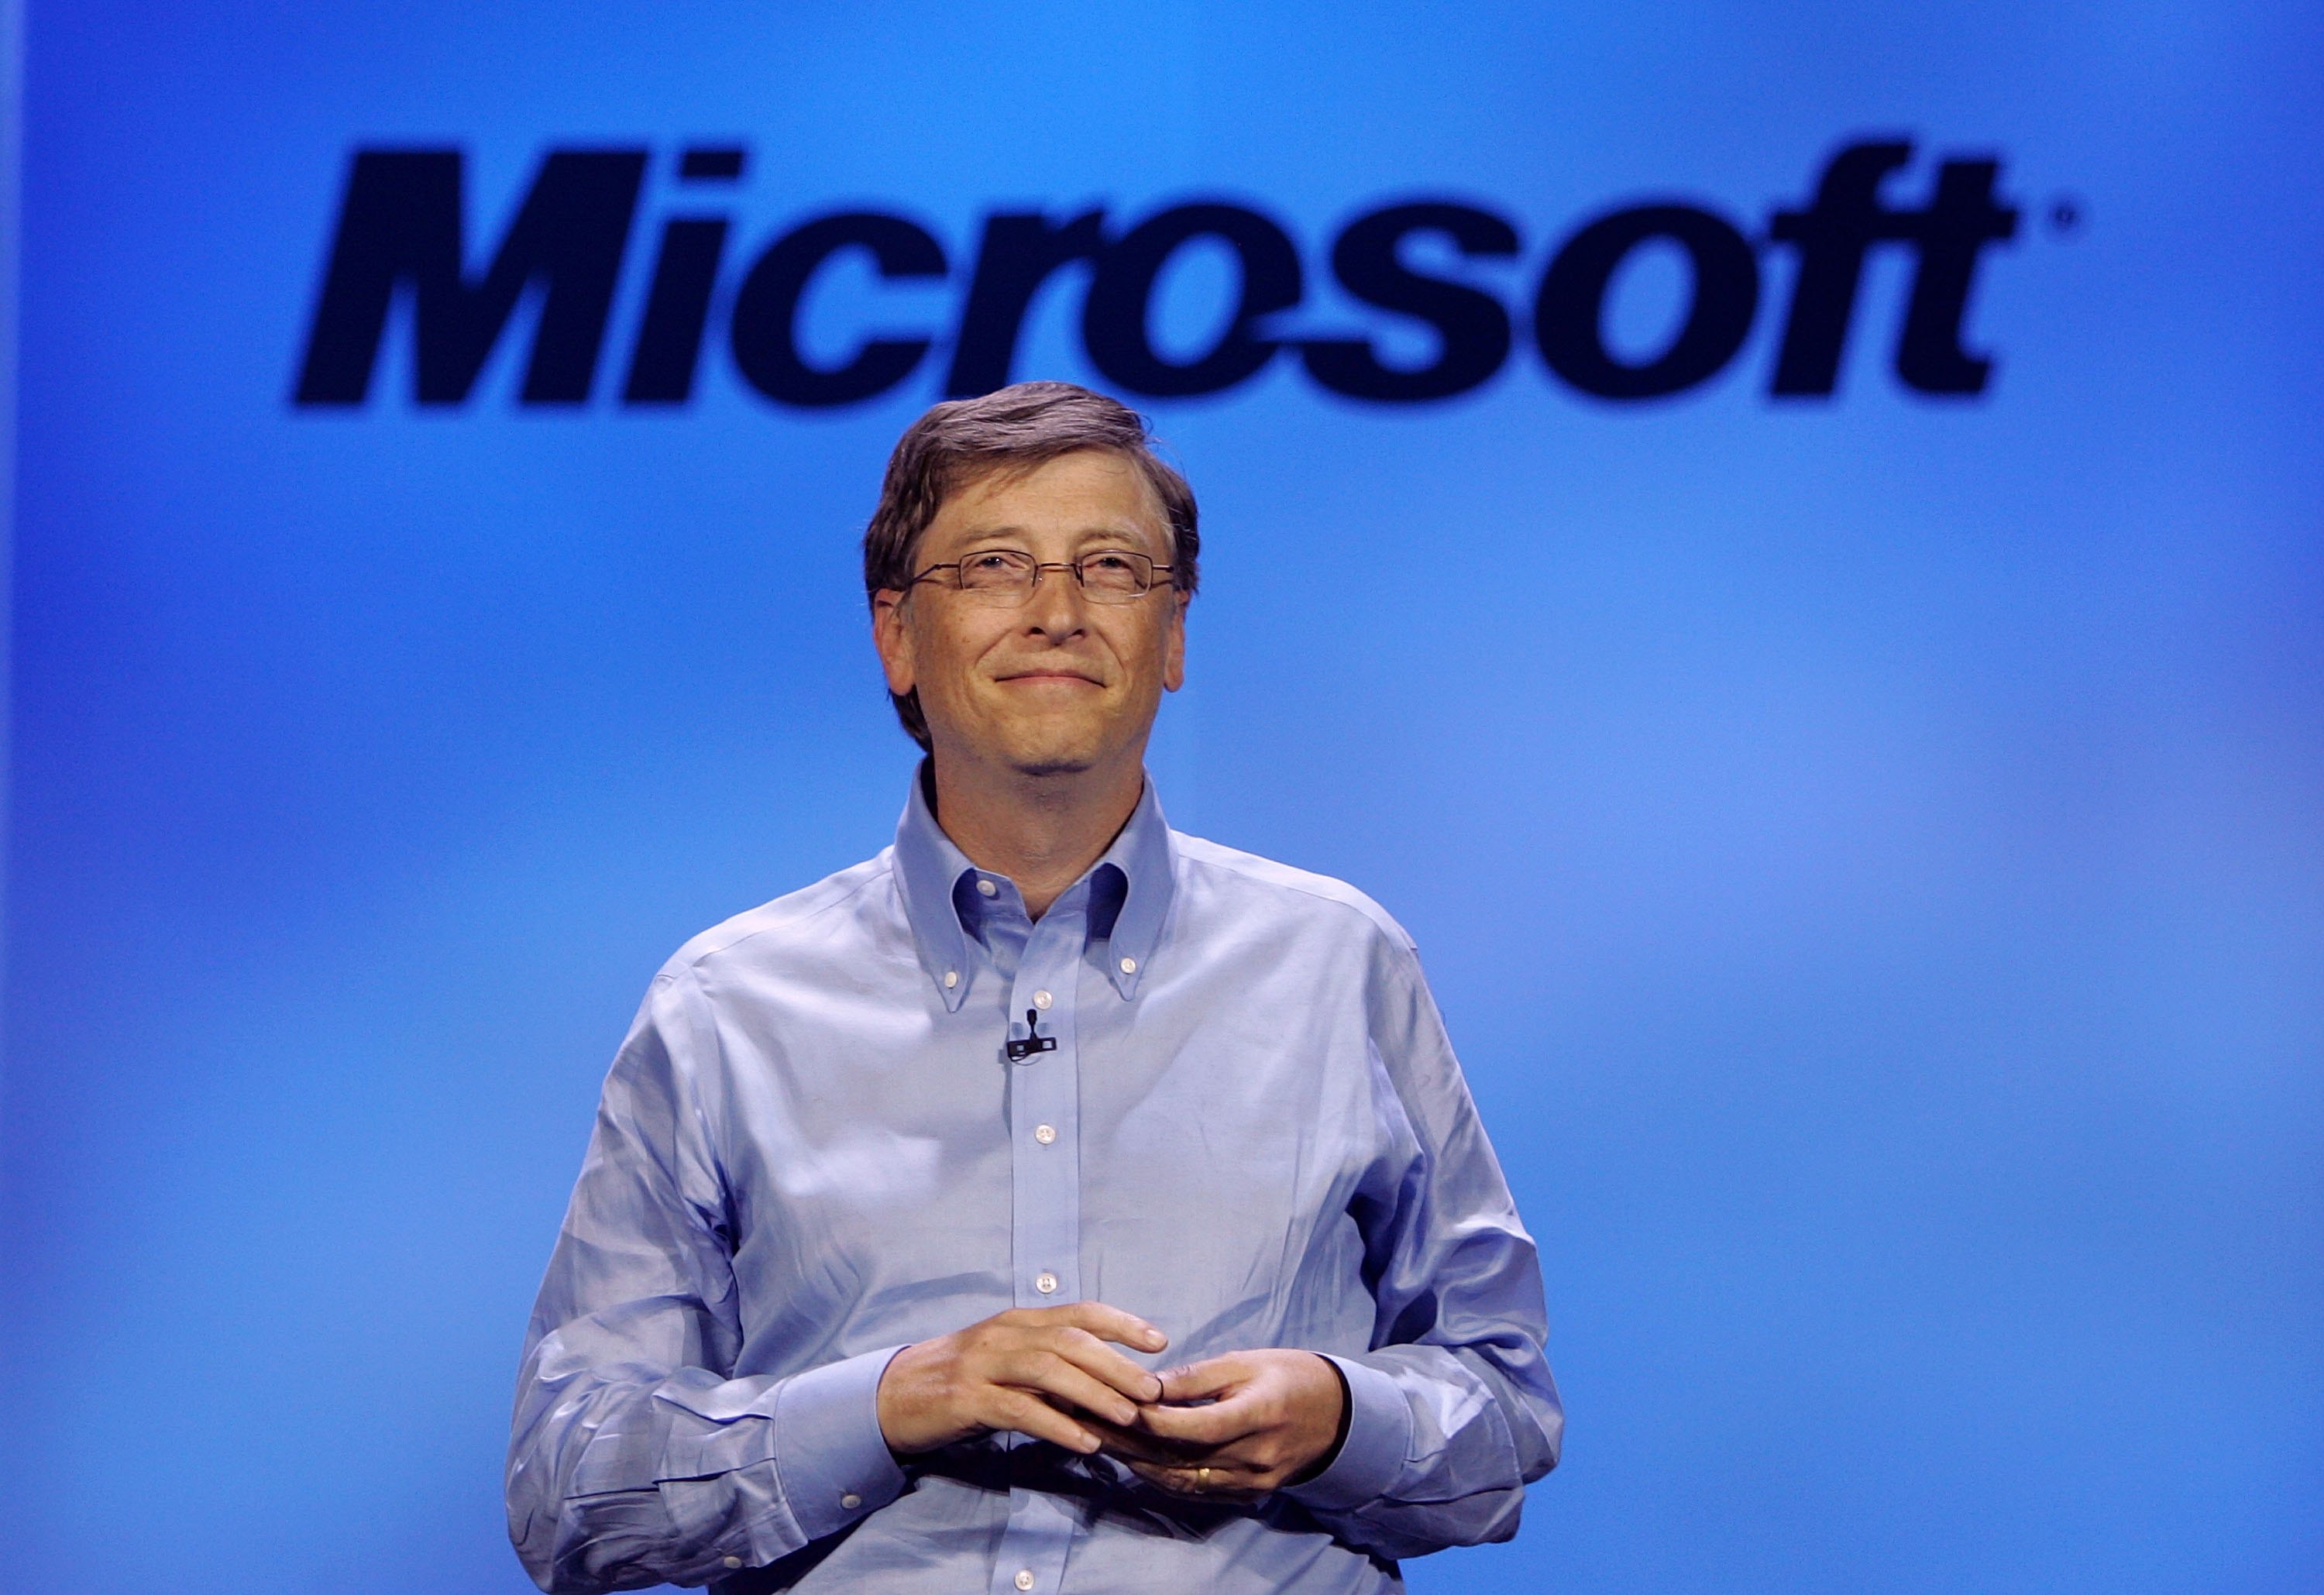 Microsoft chairman Bill Gates delivers a keynote address at the 40th annual Consumer Electronics Show (CES) convention January 7, 2007 in Las Vegas, Nevada. (Justin Sullivan—Getty Images)